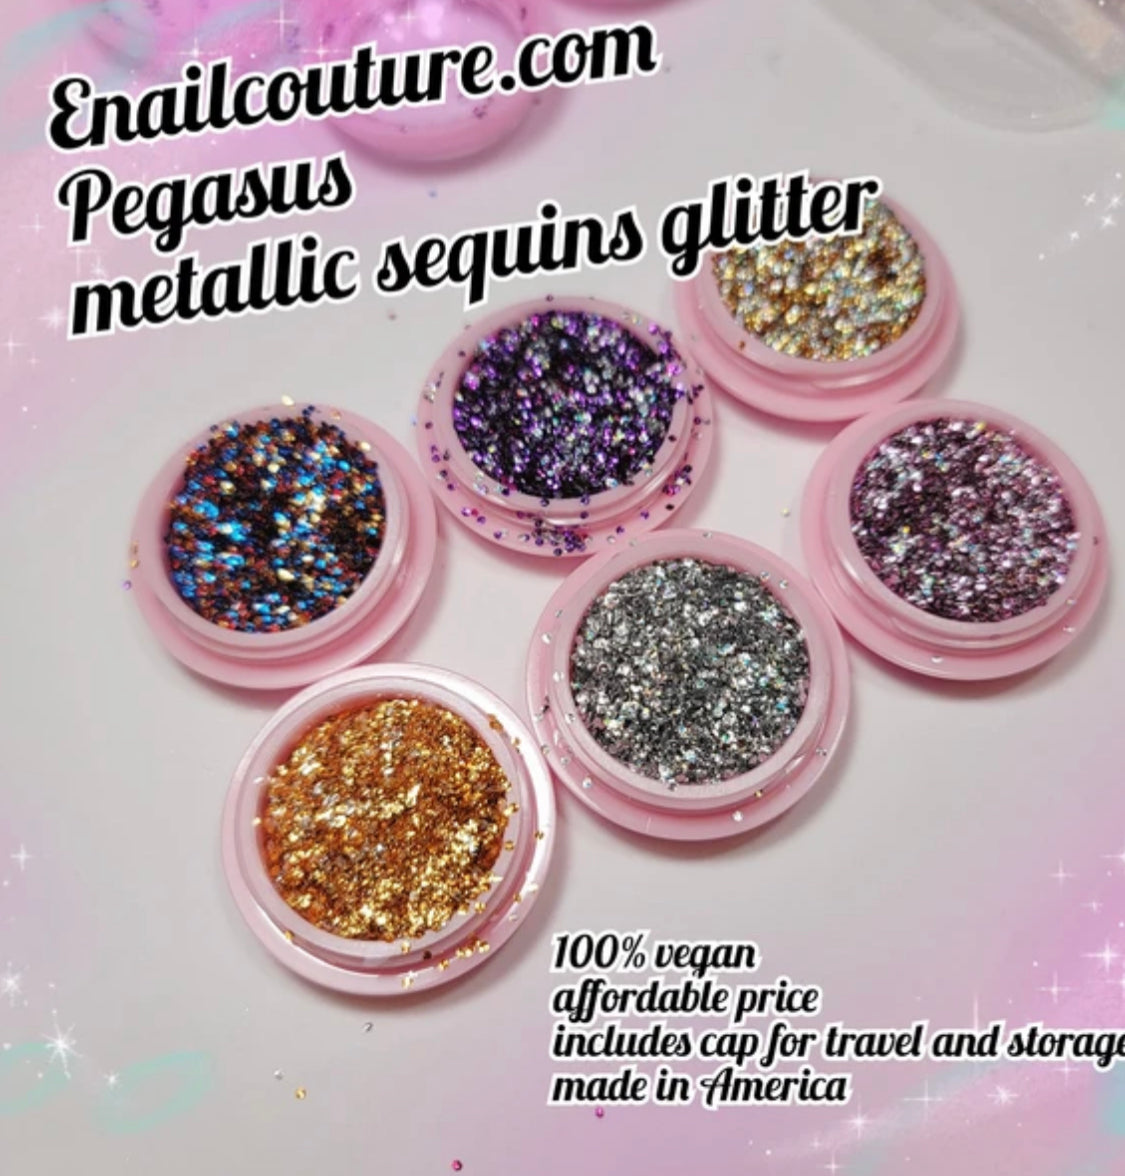 Glitter Collection